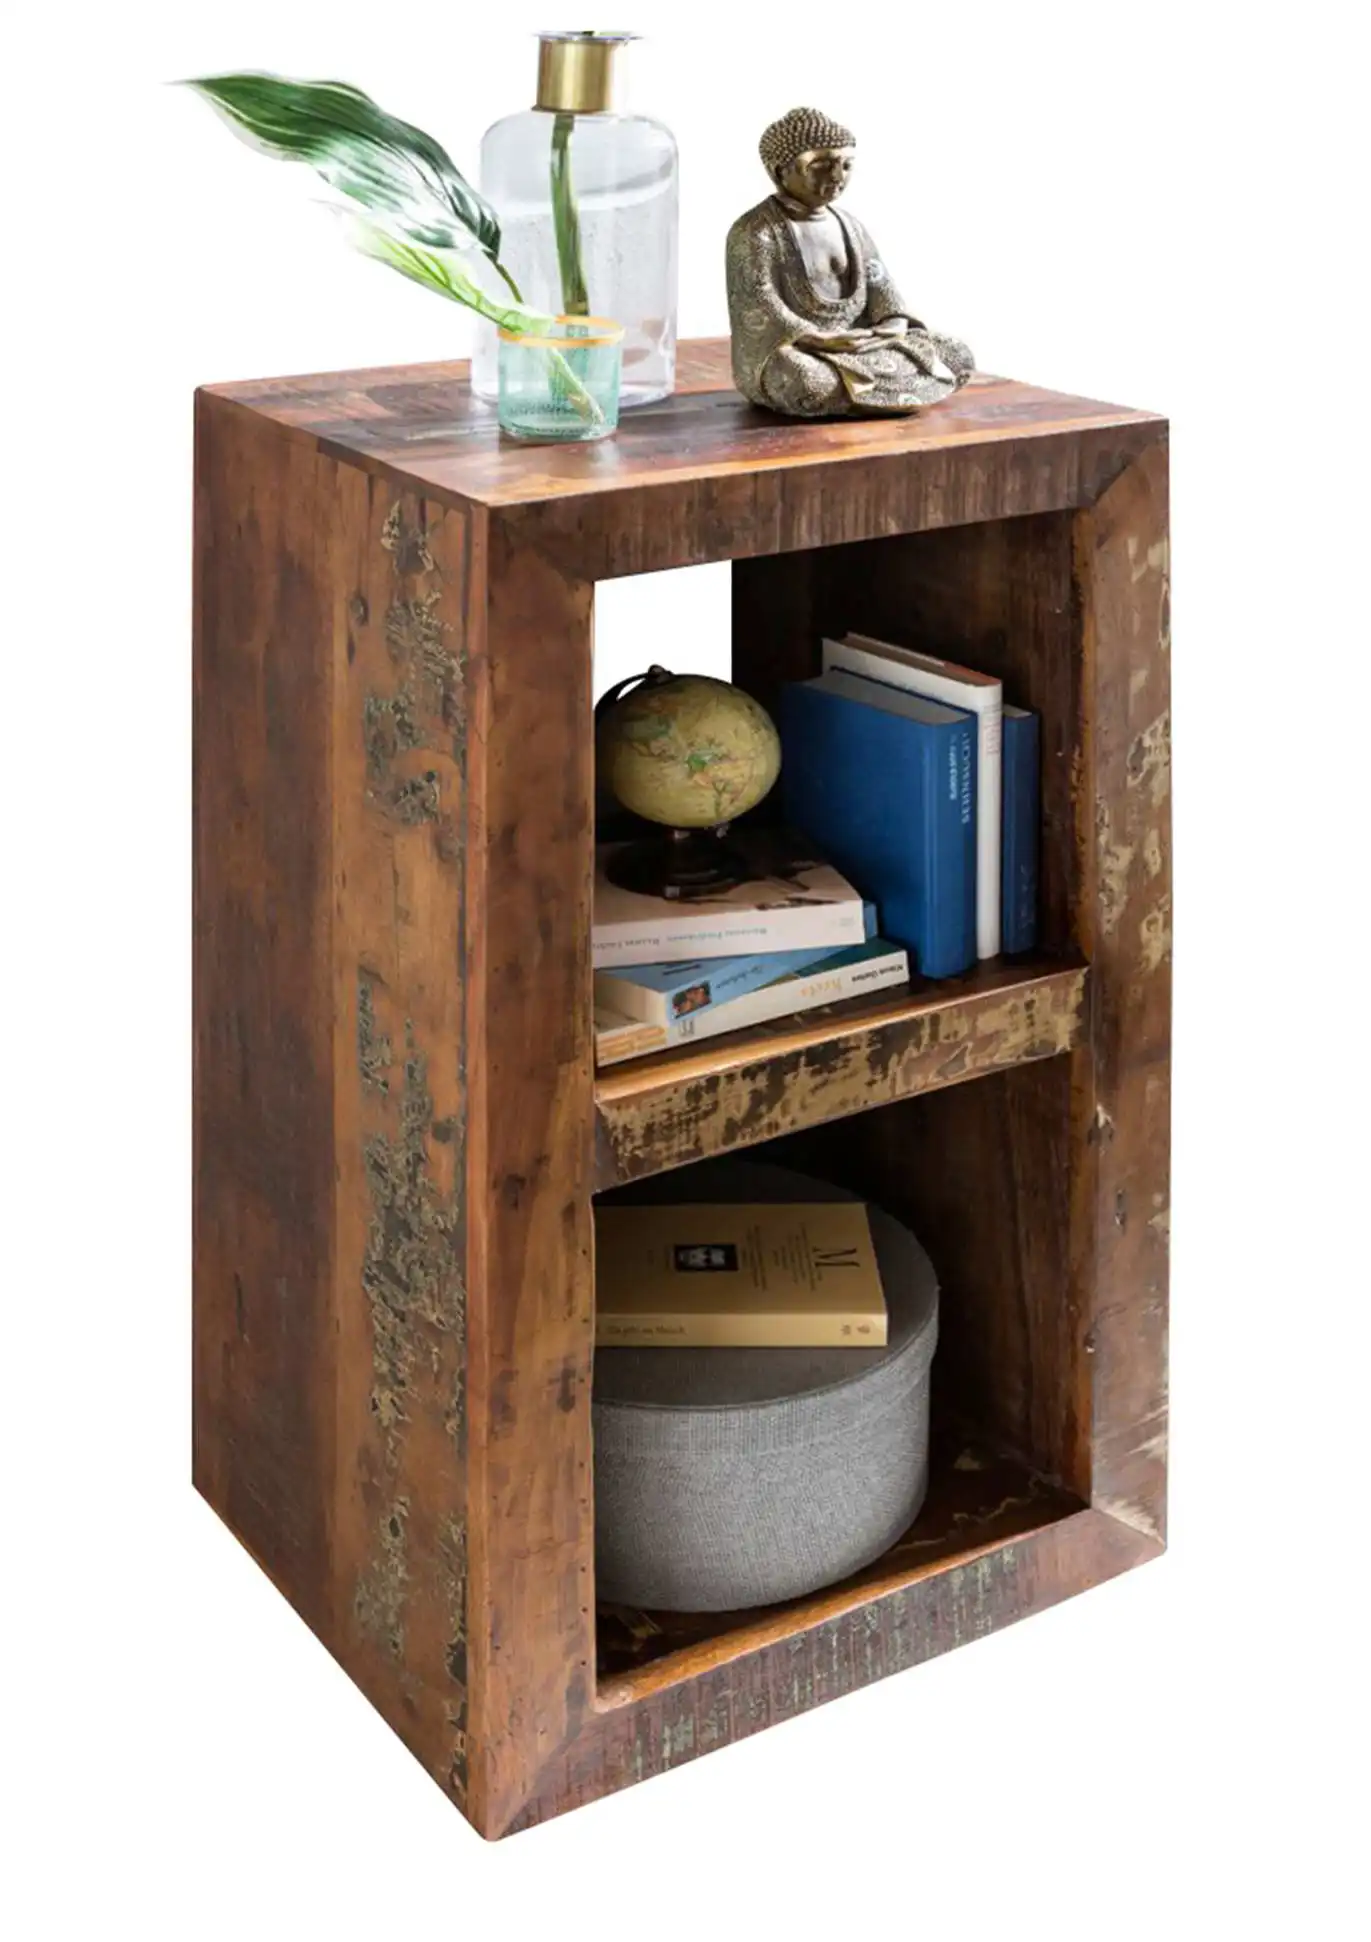 Reclaimed Wood Hollow Side Table - popular handicrafts